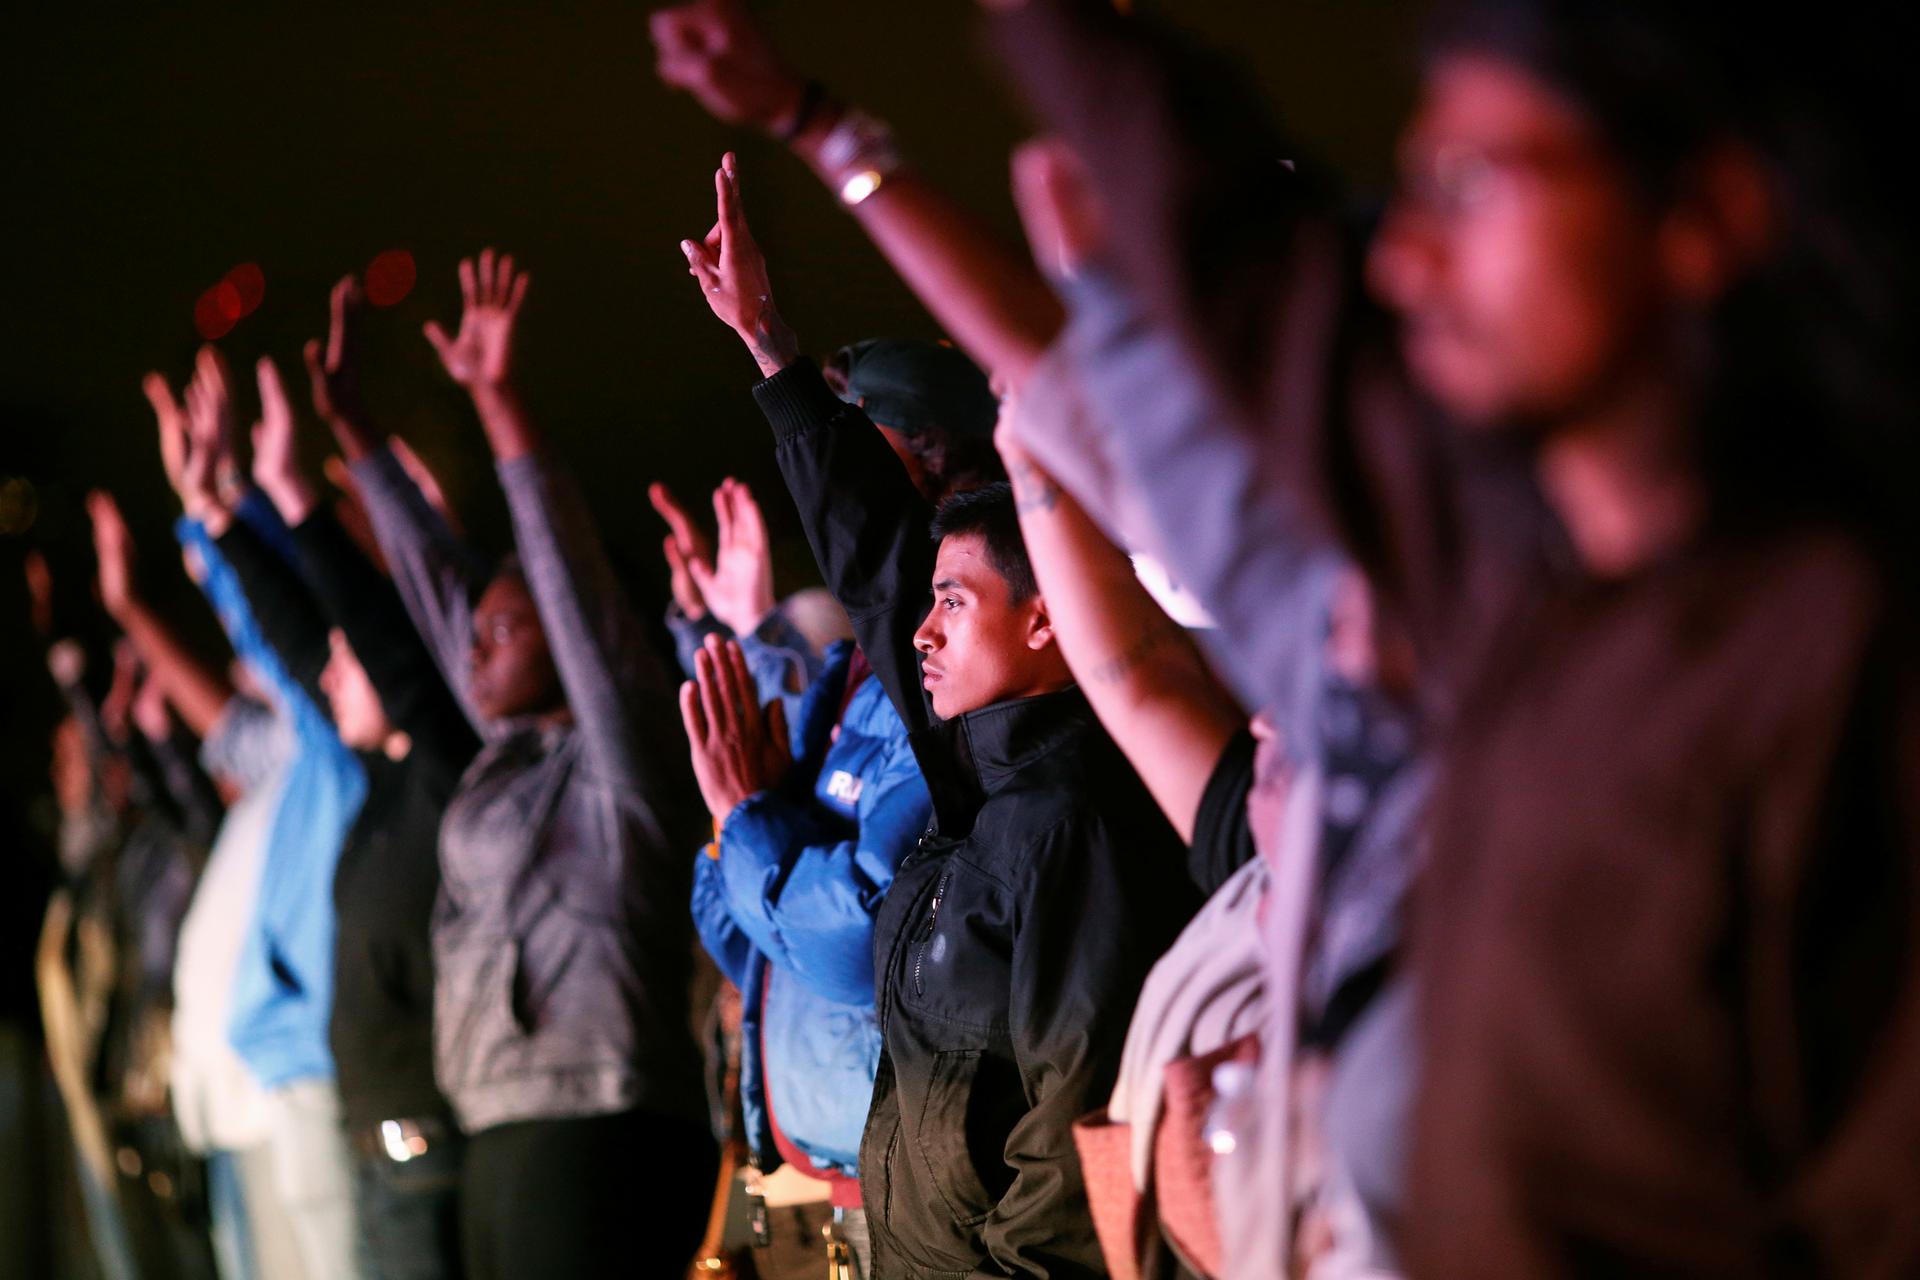 Demonstrators raise their hands toward a line of police officers on Highway 880 during a protest against the police shootings that lead to two deaths in Louisiana and Minnesota, respectively, in Oakland, California, U.S.